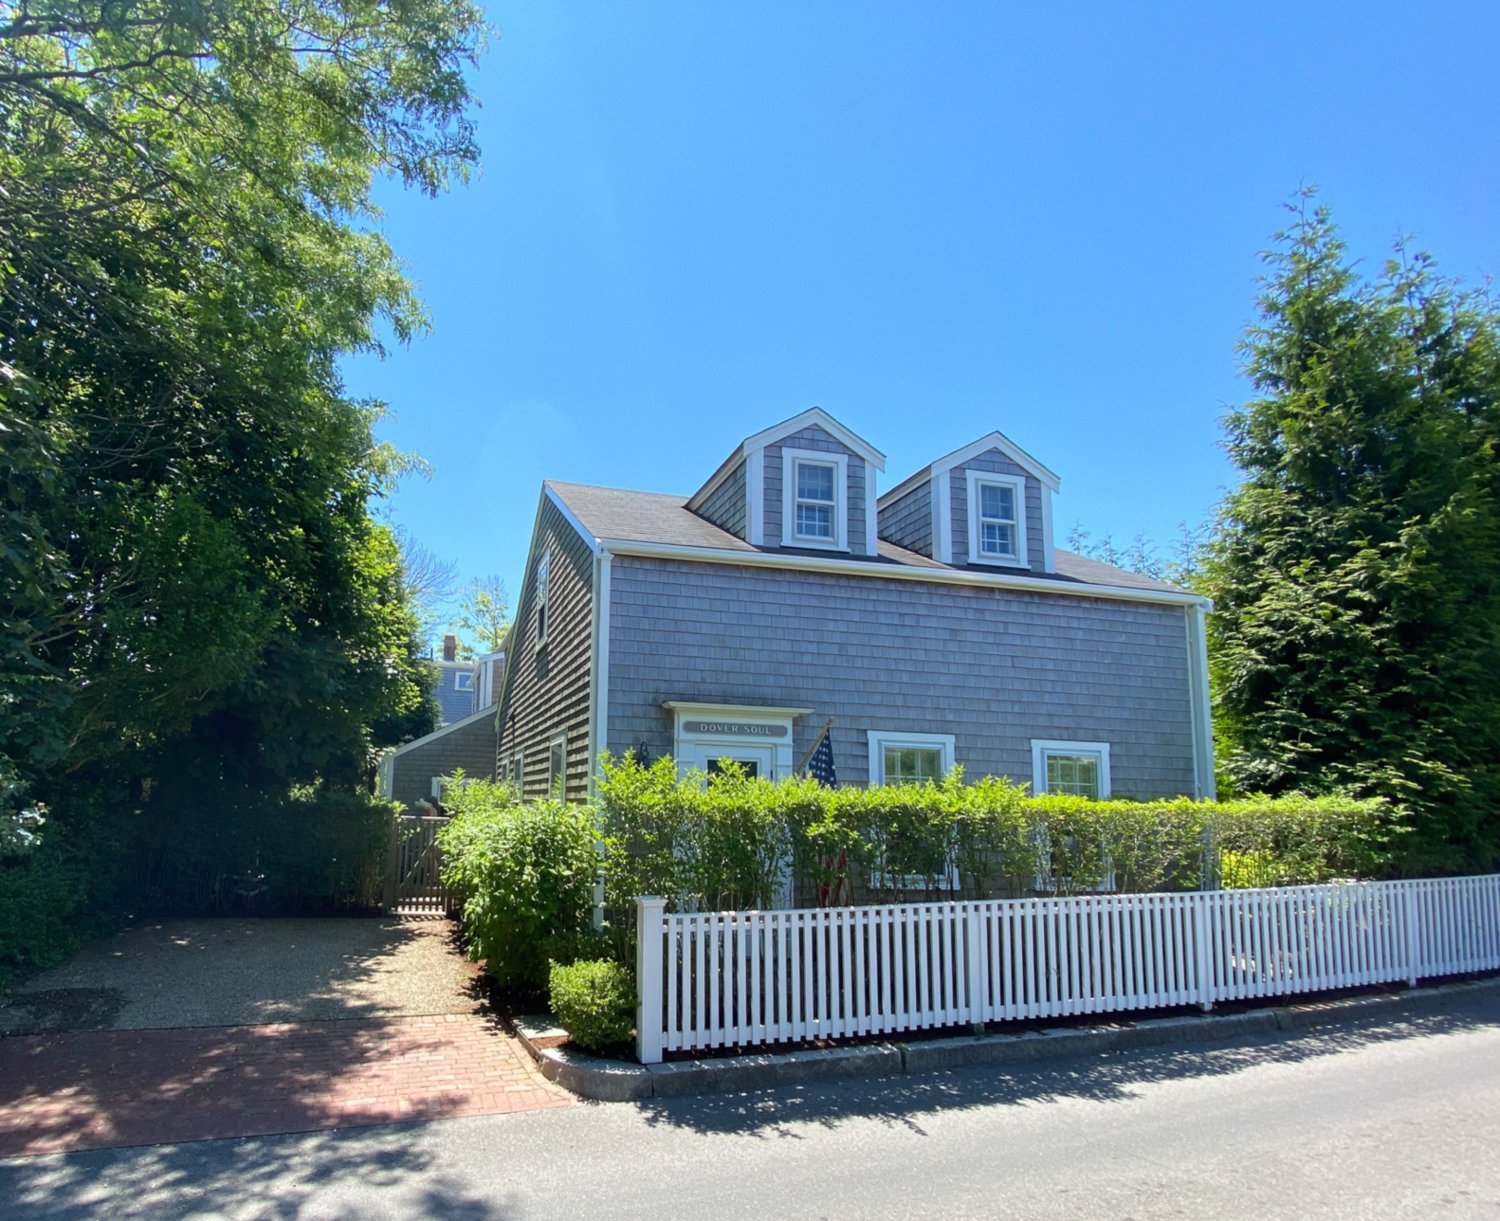 Located on the outskirts of town on a quaint one-way street, this five-bedroom, four-and-a-half-bathroom home was built in 1800 and beautifully renovated to incorporate modern charm.